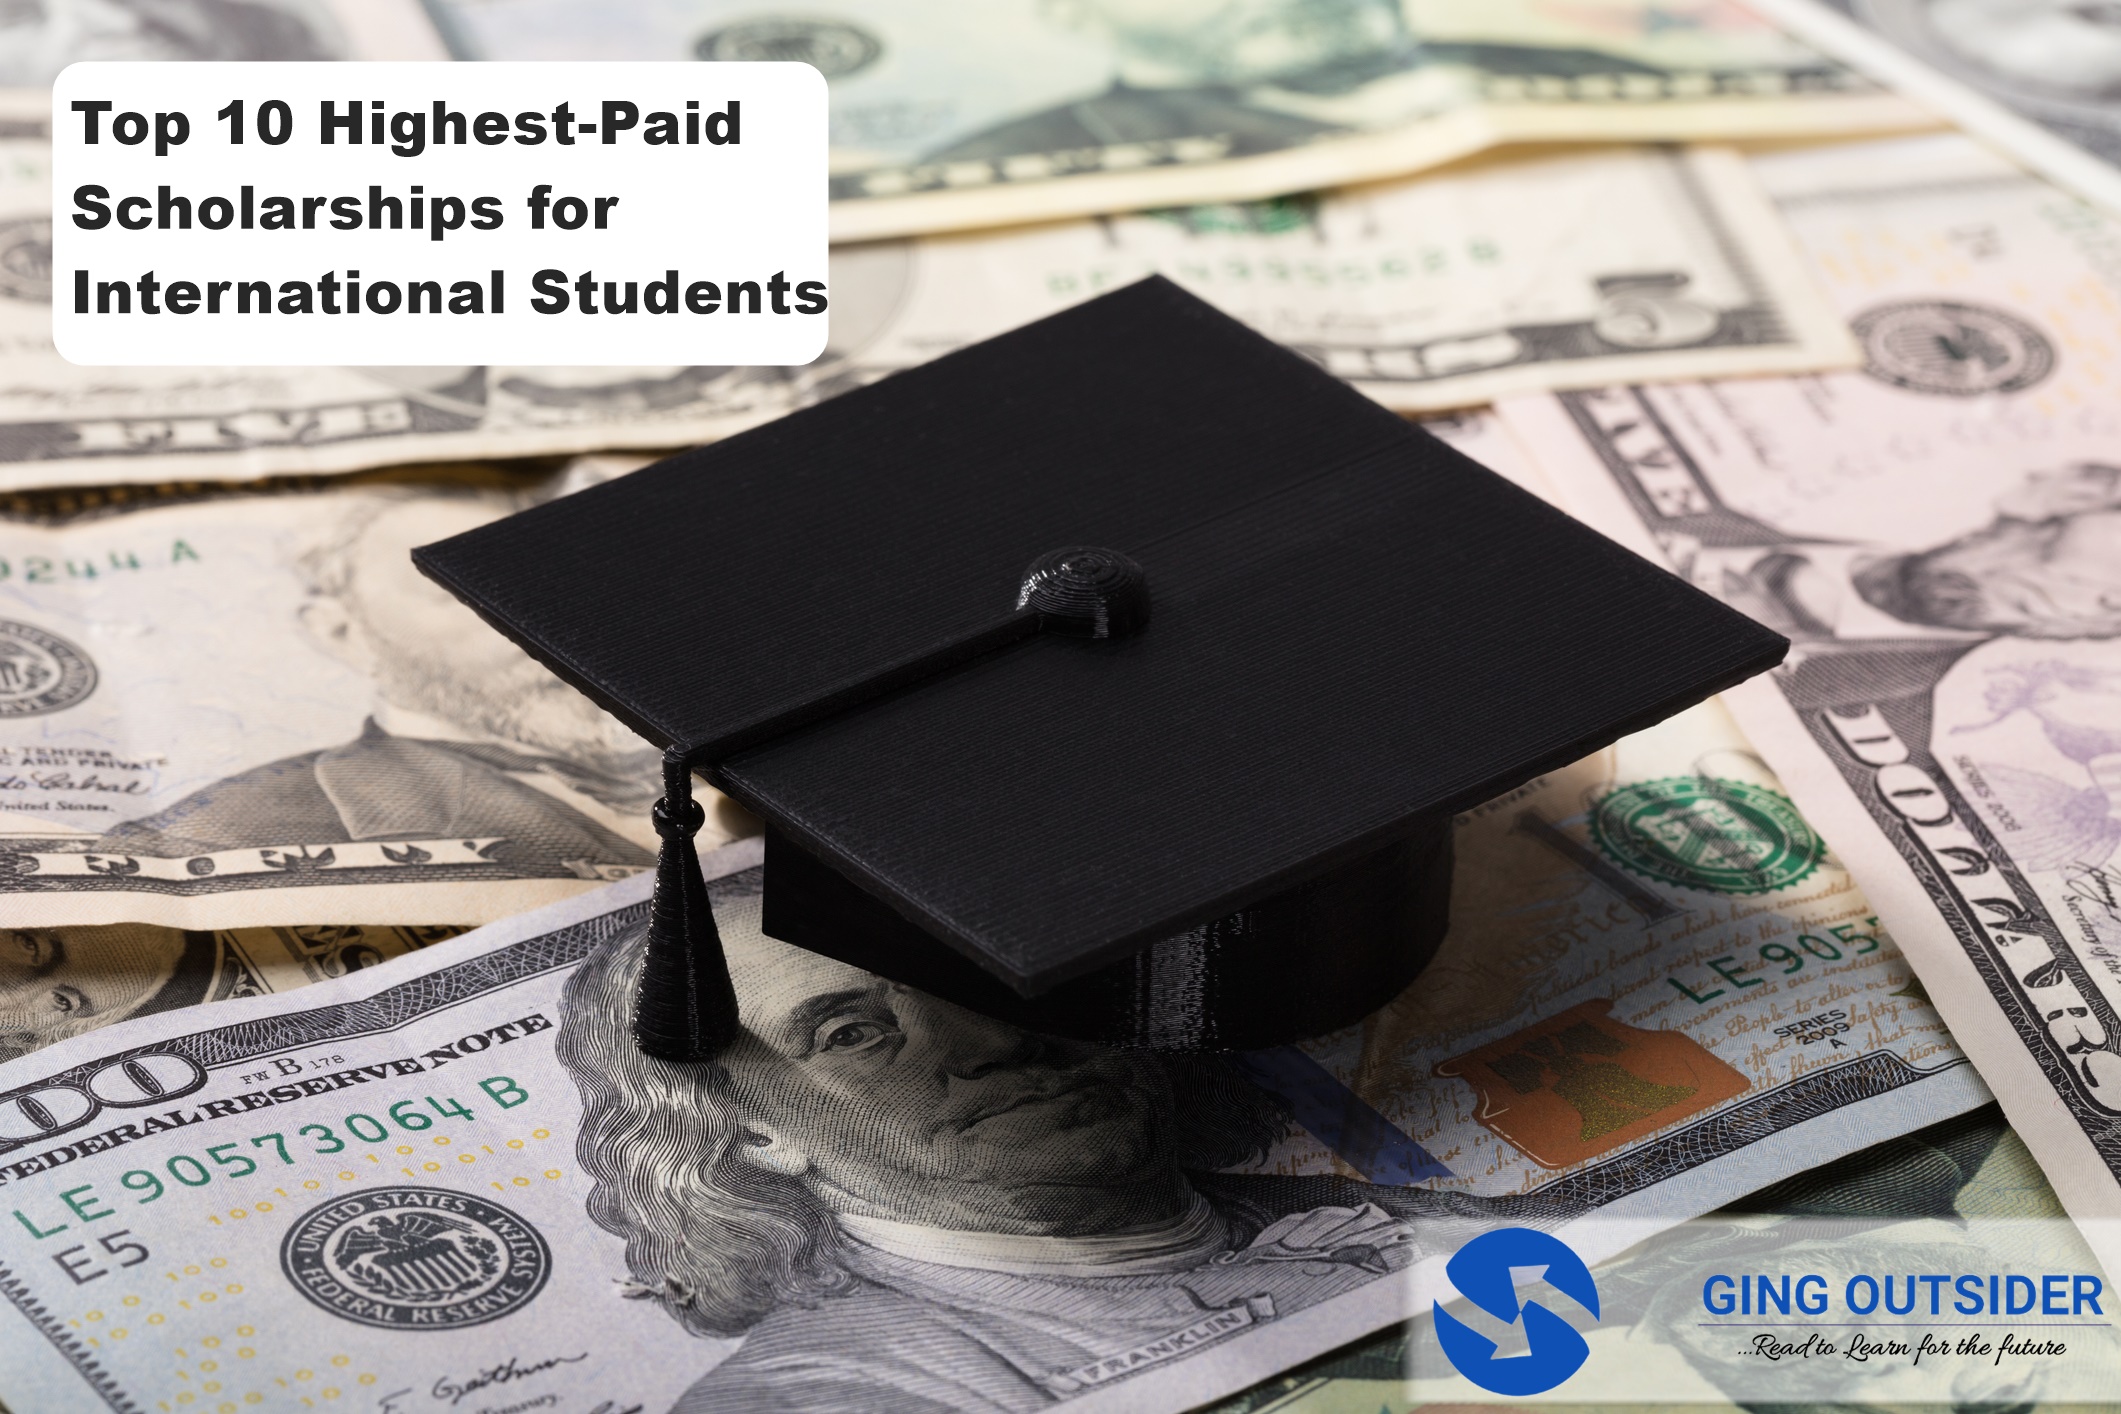 Top 10 Highest-Paid Scholarships